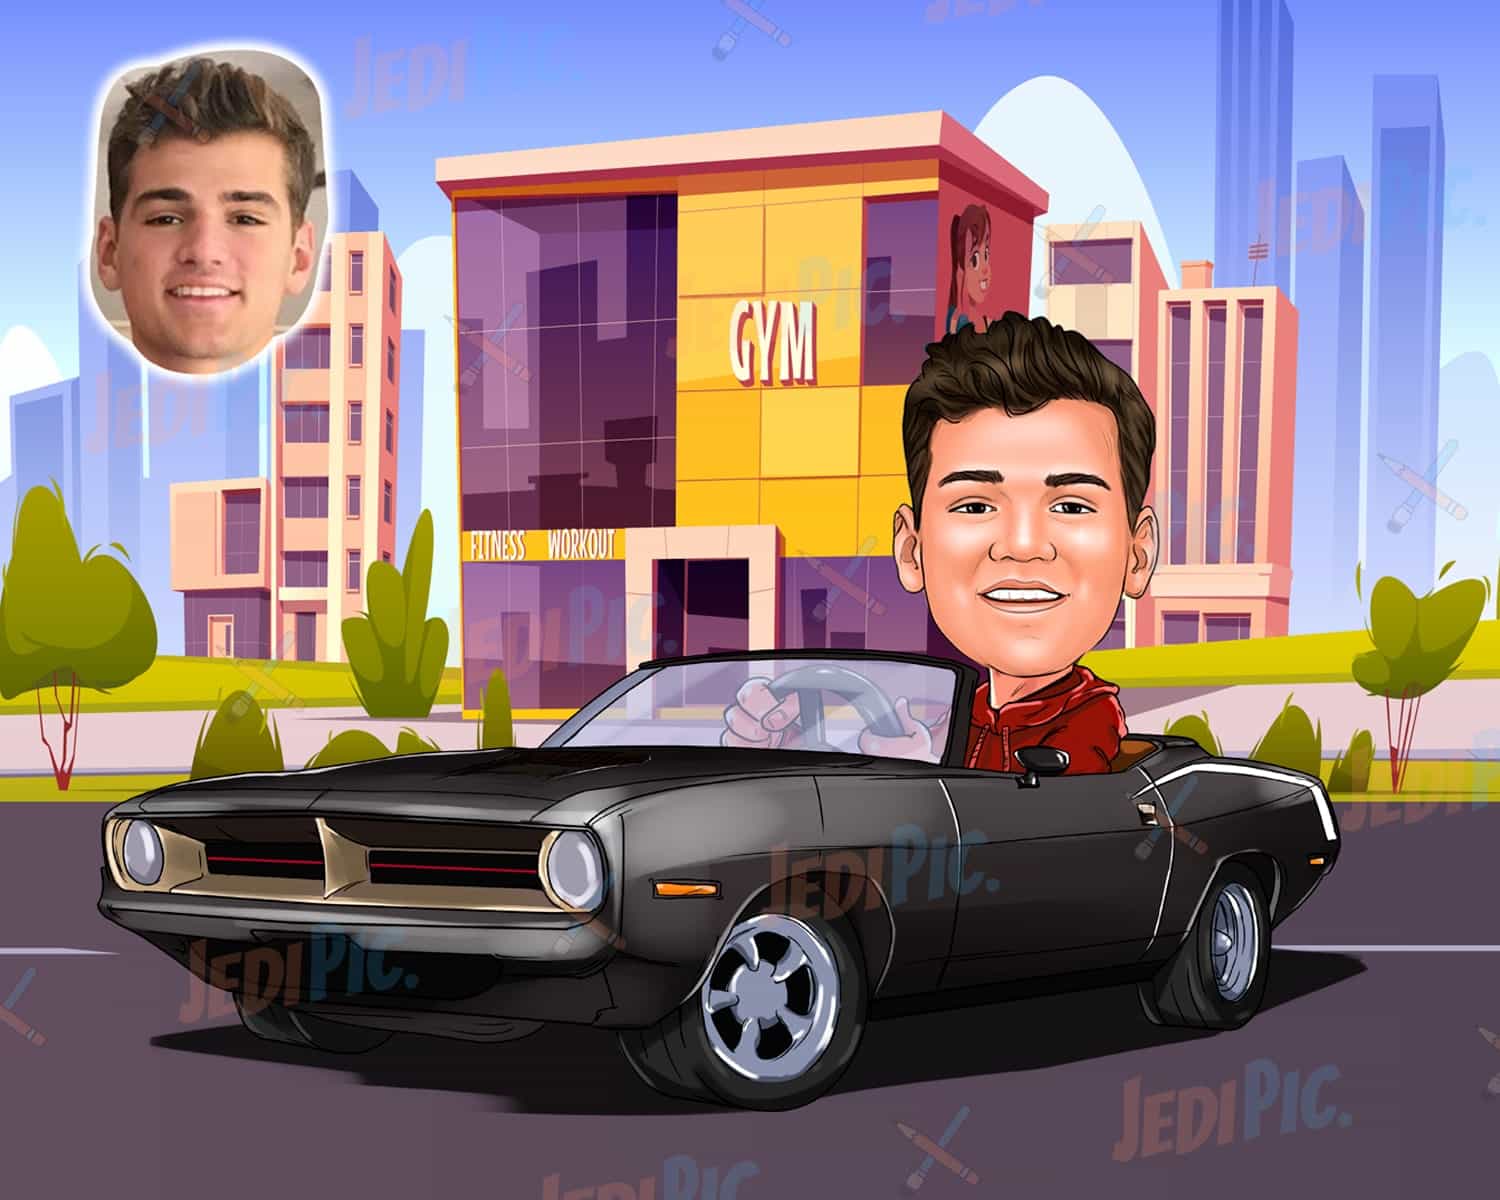 Man Driving Car Drawing with Custom Background in Digital Style